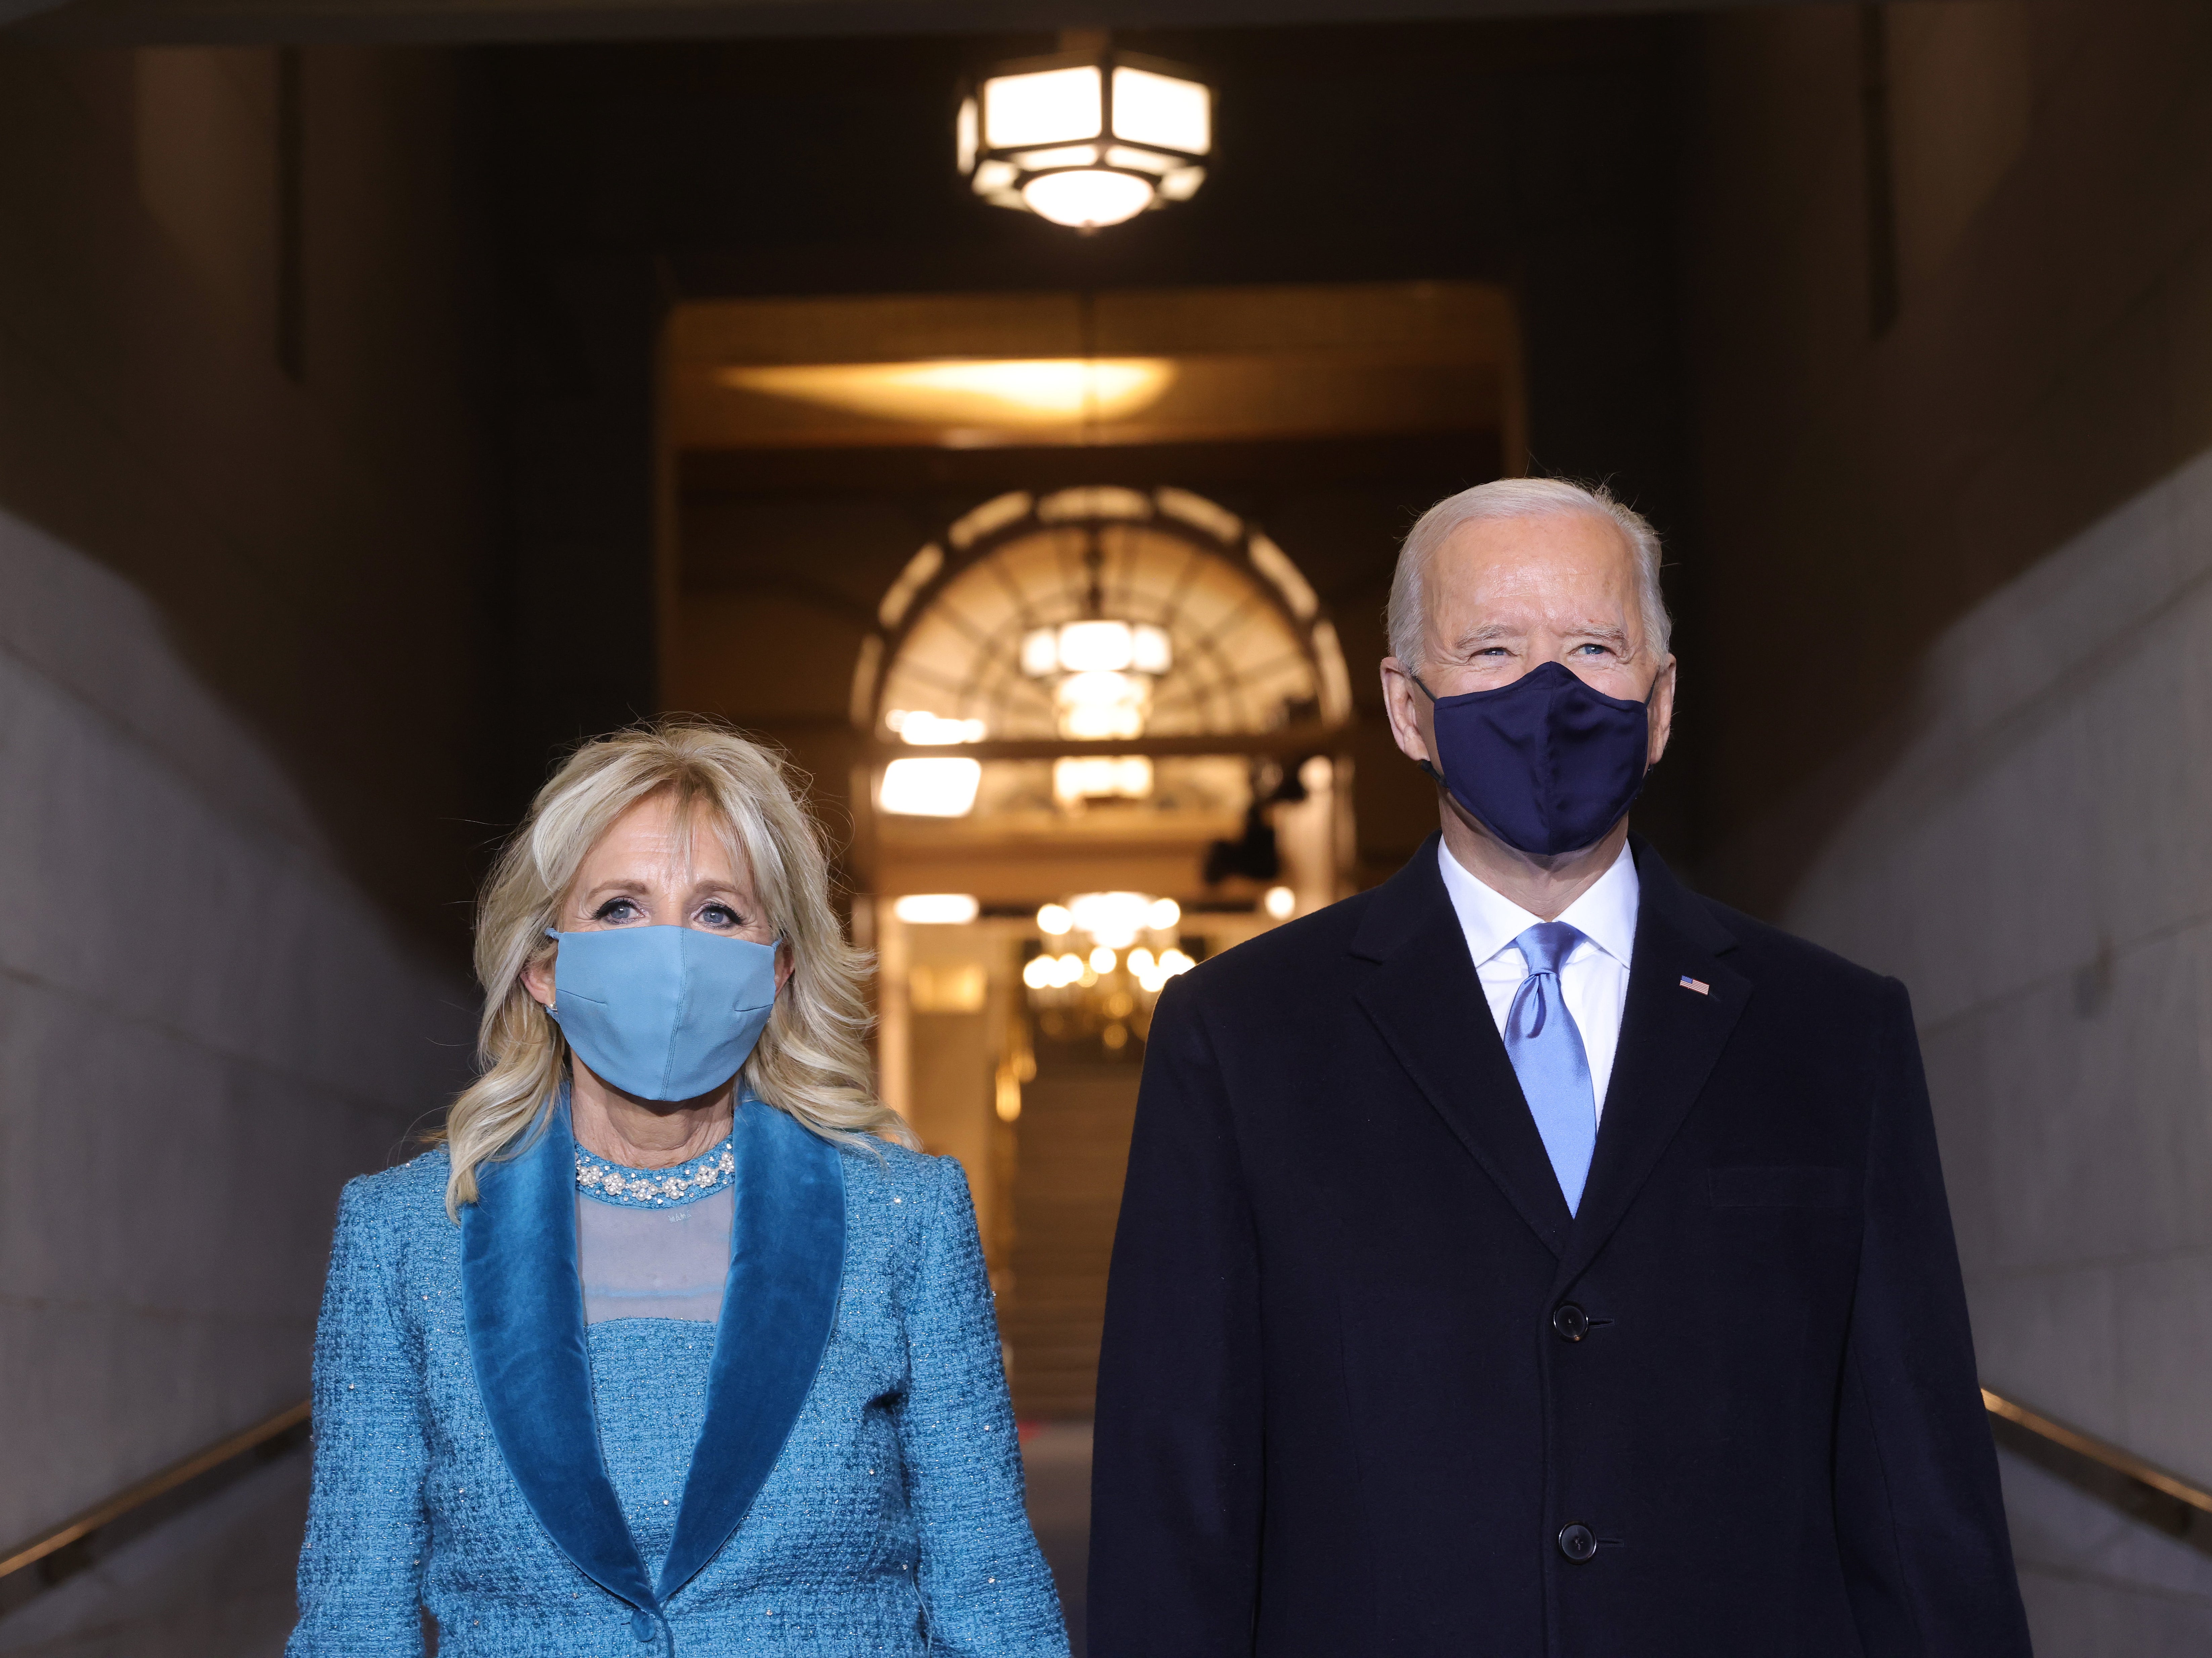 President-elect Joe Biden and Jill Biden arrive at his inauguration ceremony on the West Front of the Capitol